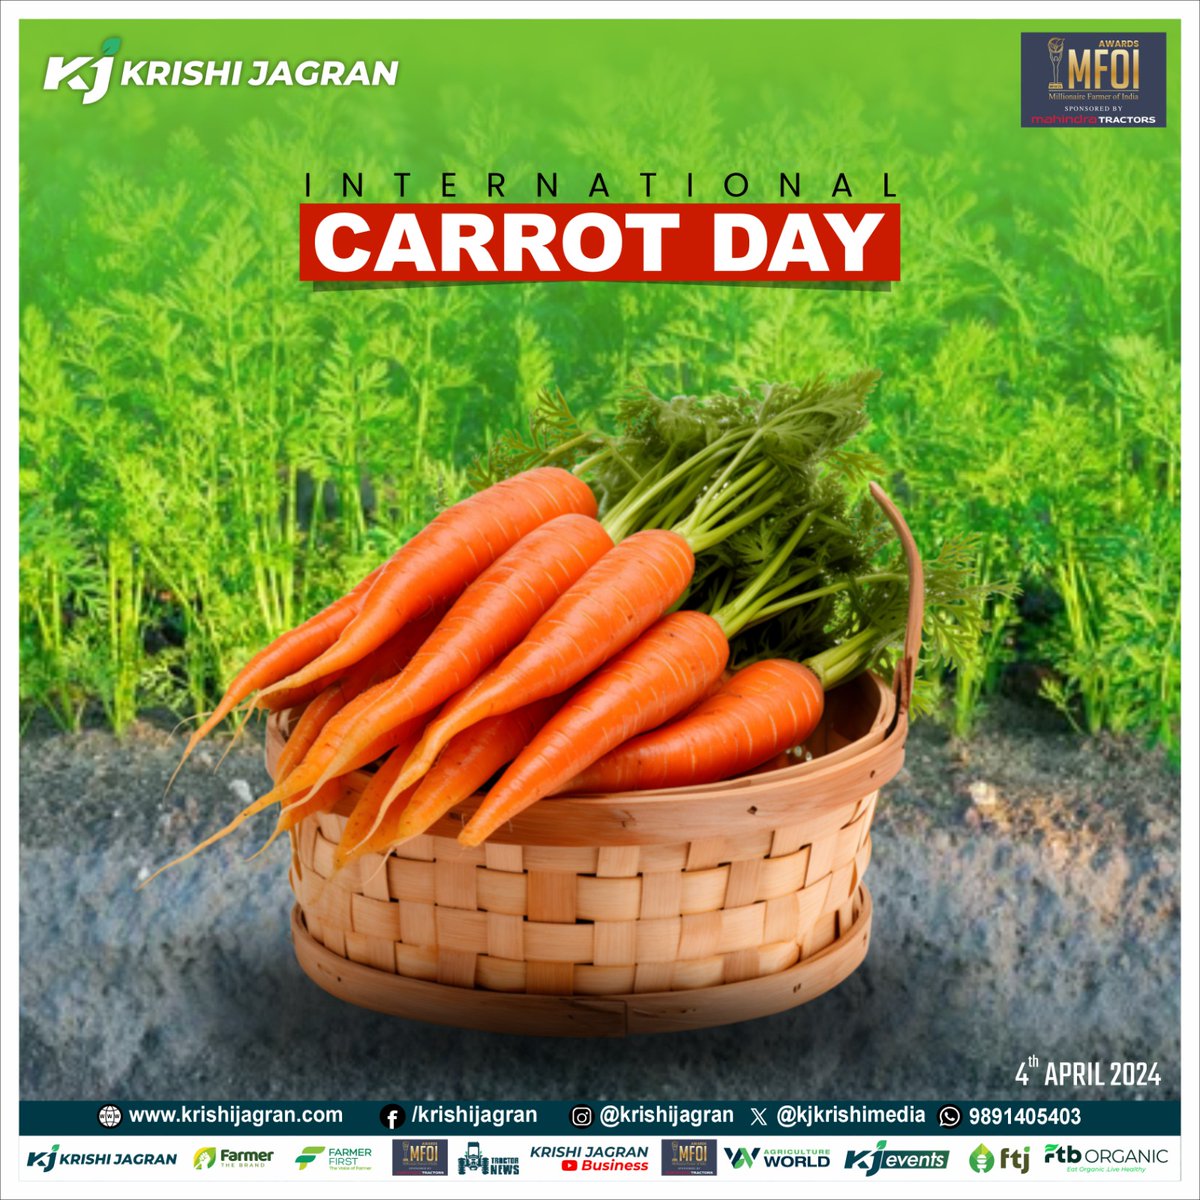 'Marking International Carrot Day 2024, let's honor the versatile vegetable that adds vibrancy to our plates. Embrace the crunch and color of this nutritious staple! 🥕 #InternationalCarrotDay #carrotday #carrots